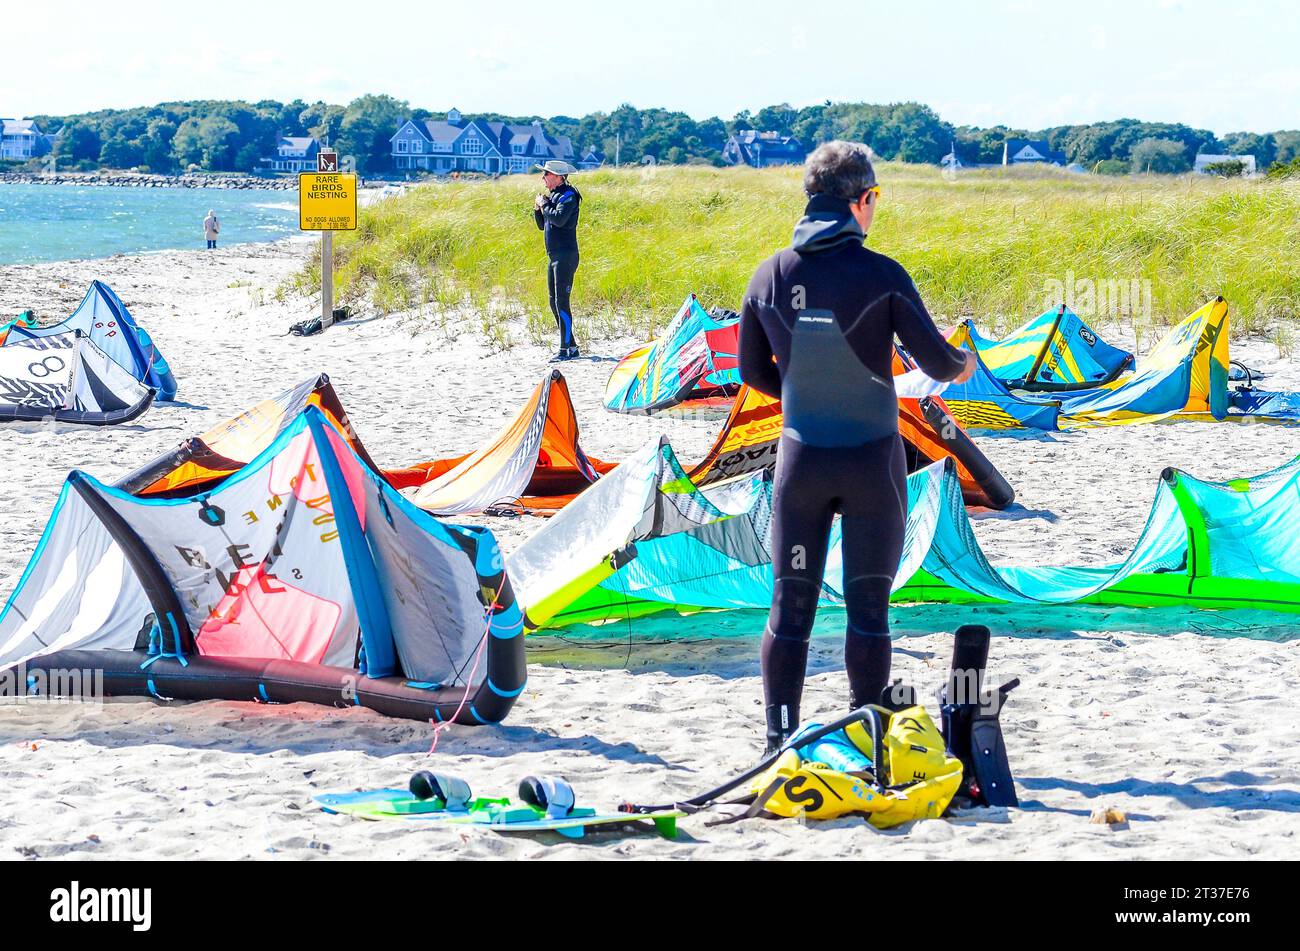 All these Kites must be blown up, so the Windsurfers can have a day in the air as well as fun on the  water. But before the fun, it is work. Stock Photo